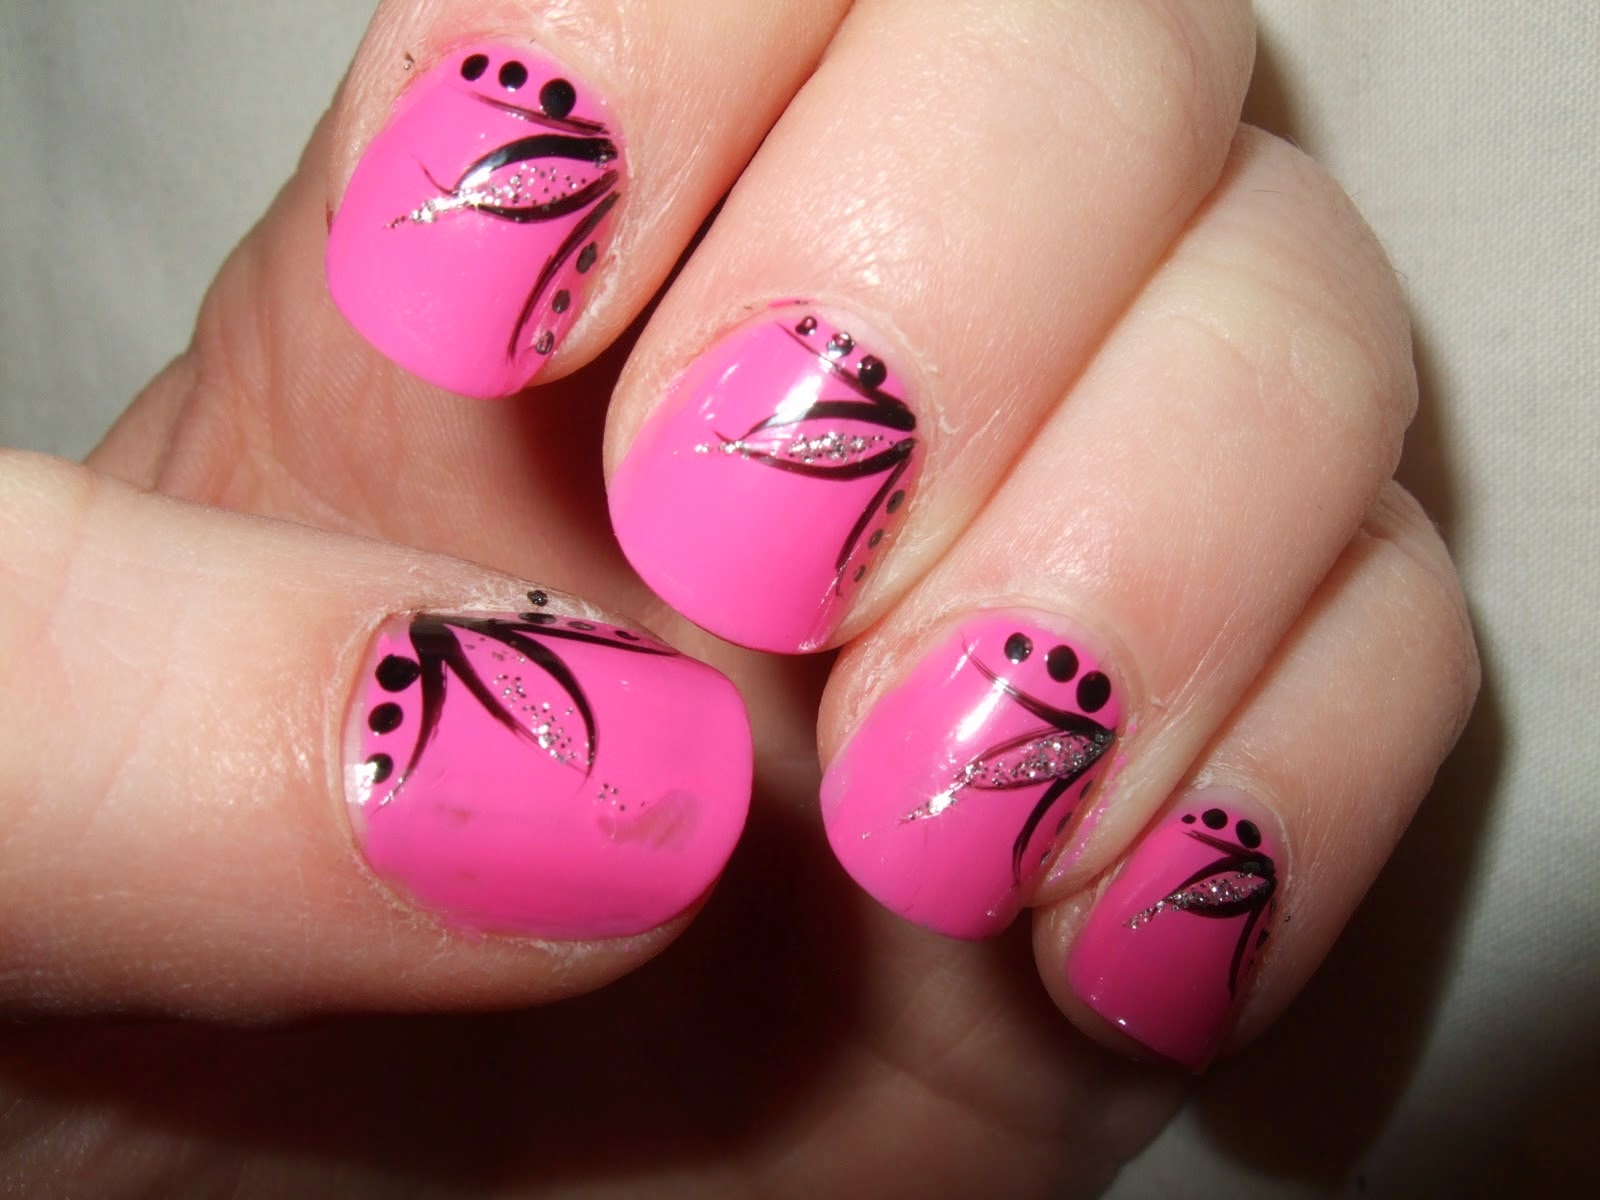 1. Nail Art with Pen and Brush: 10 Easy Designs for Beginners - wide 10